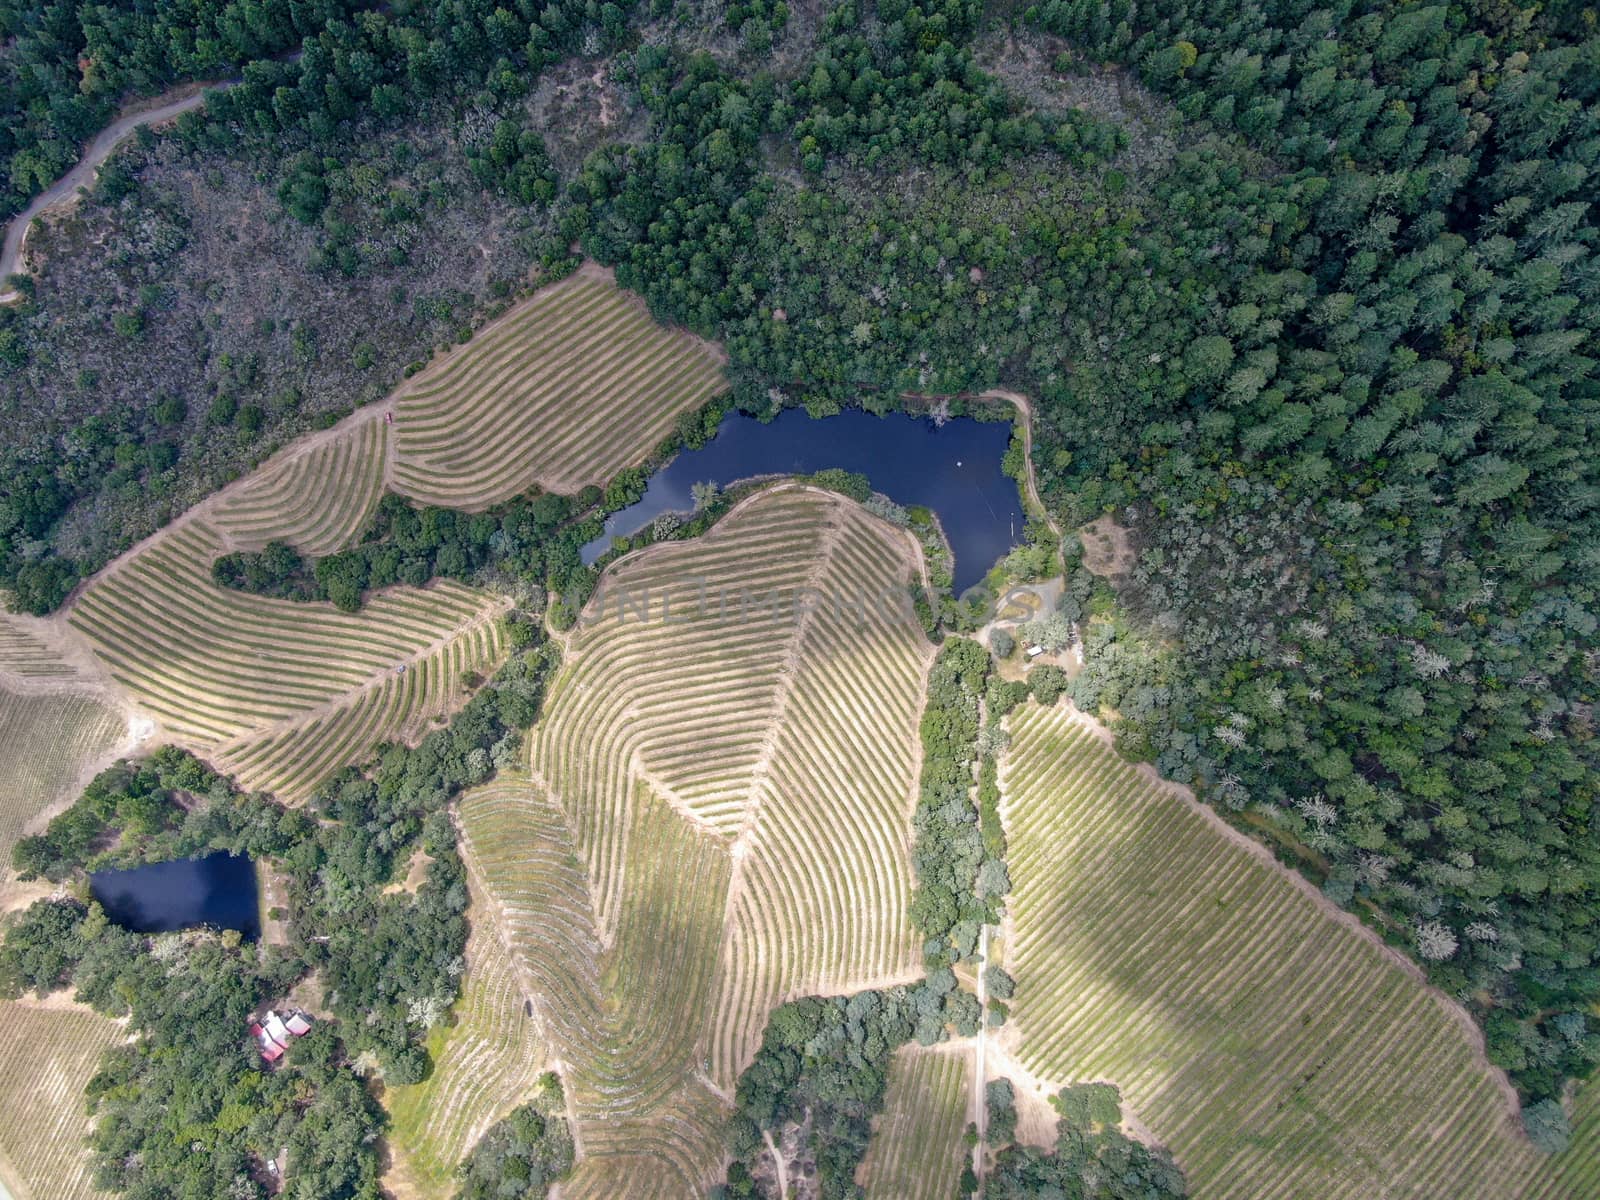 Aerial top view of Napa Valley vineyard landscape during summer season. Napa County, in California's Wine Country.